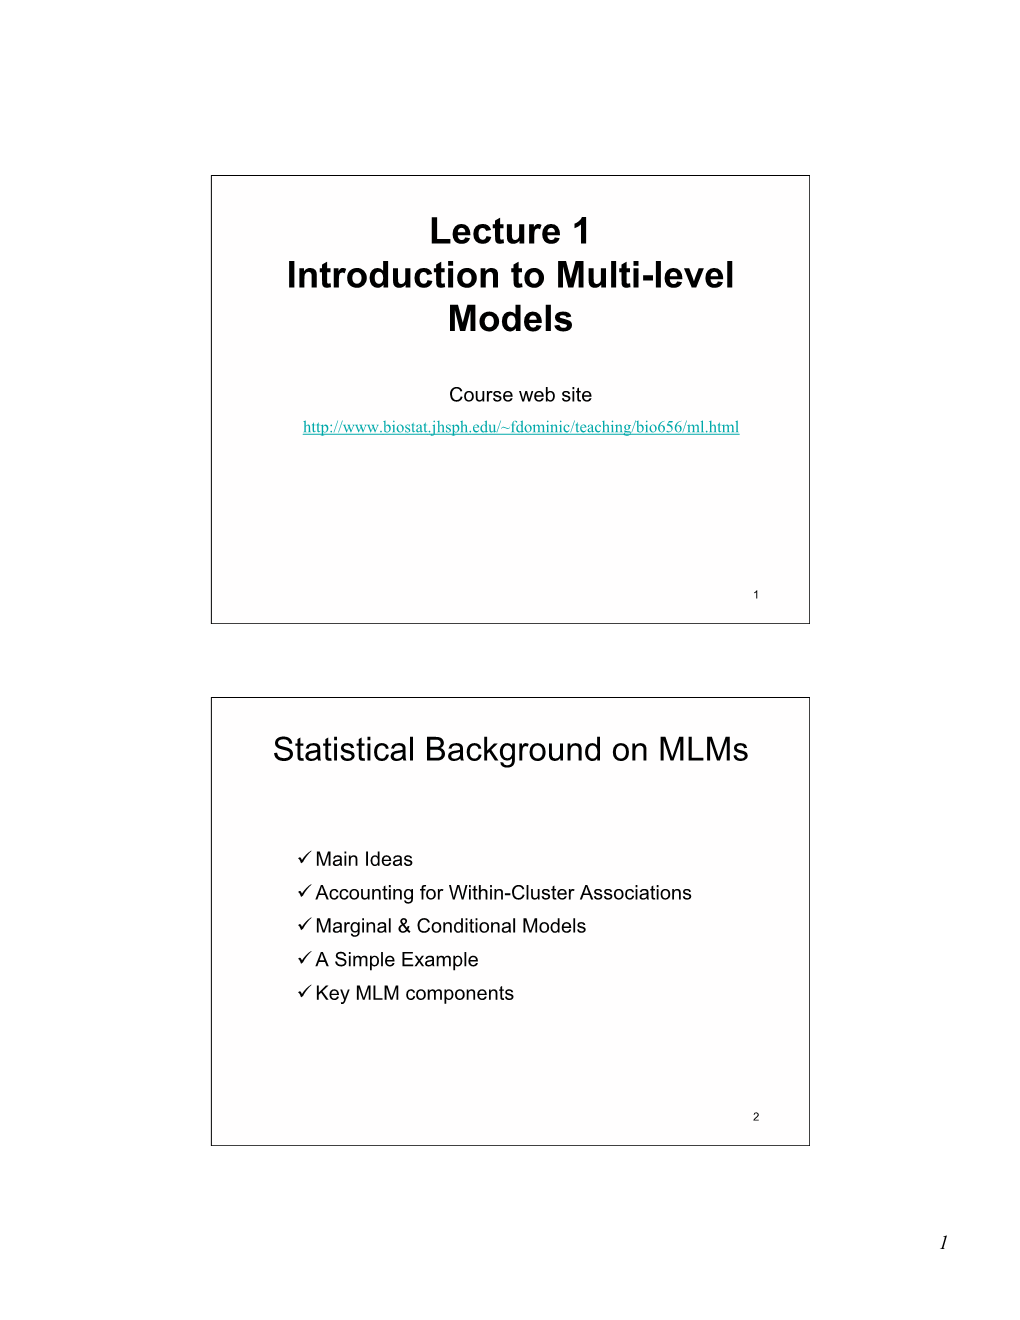 Lecture 1 Introduction to Multi-Level Models